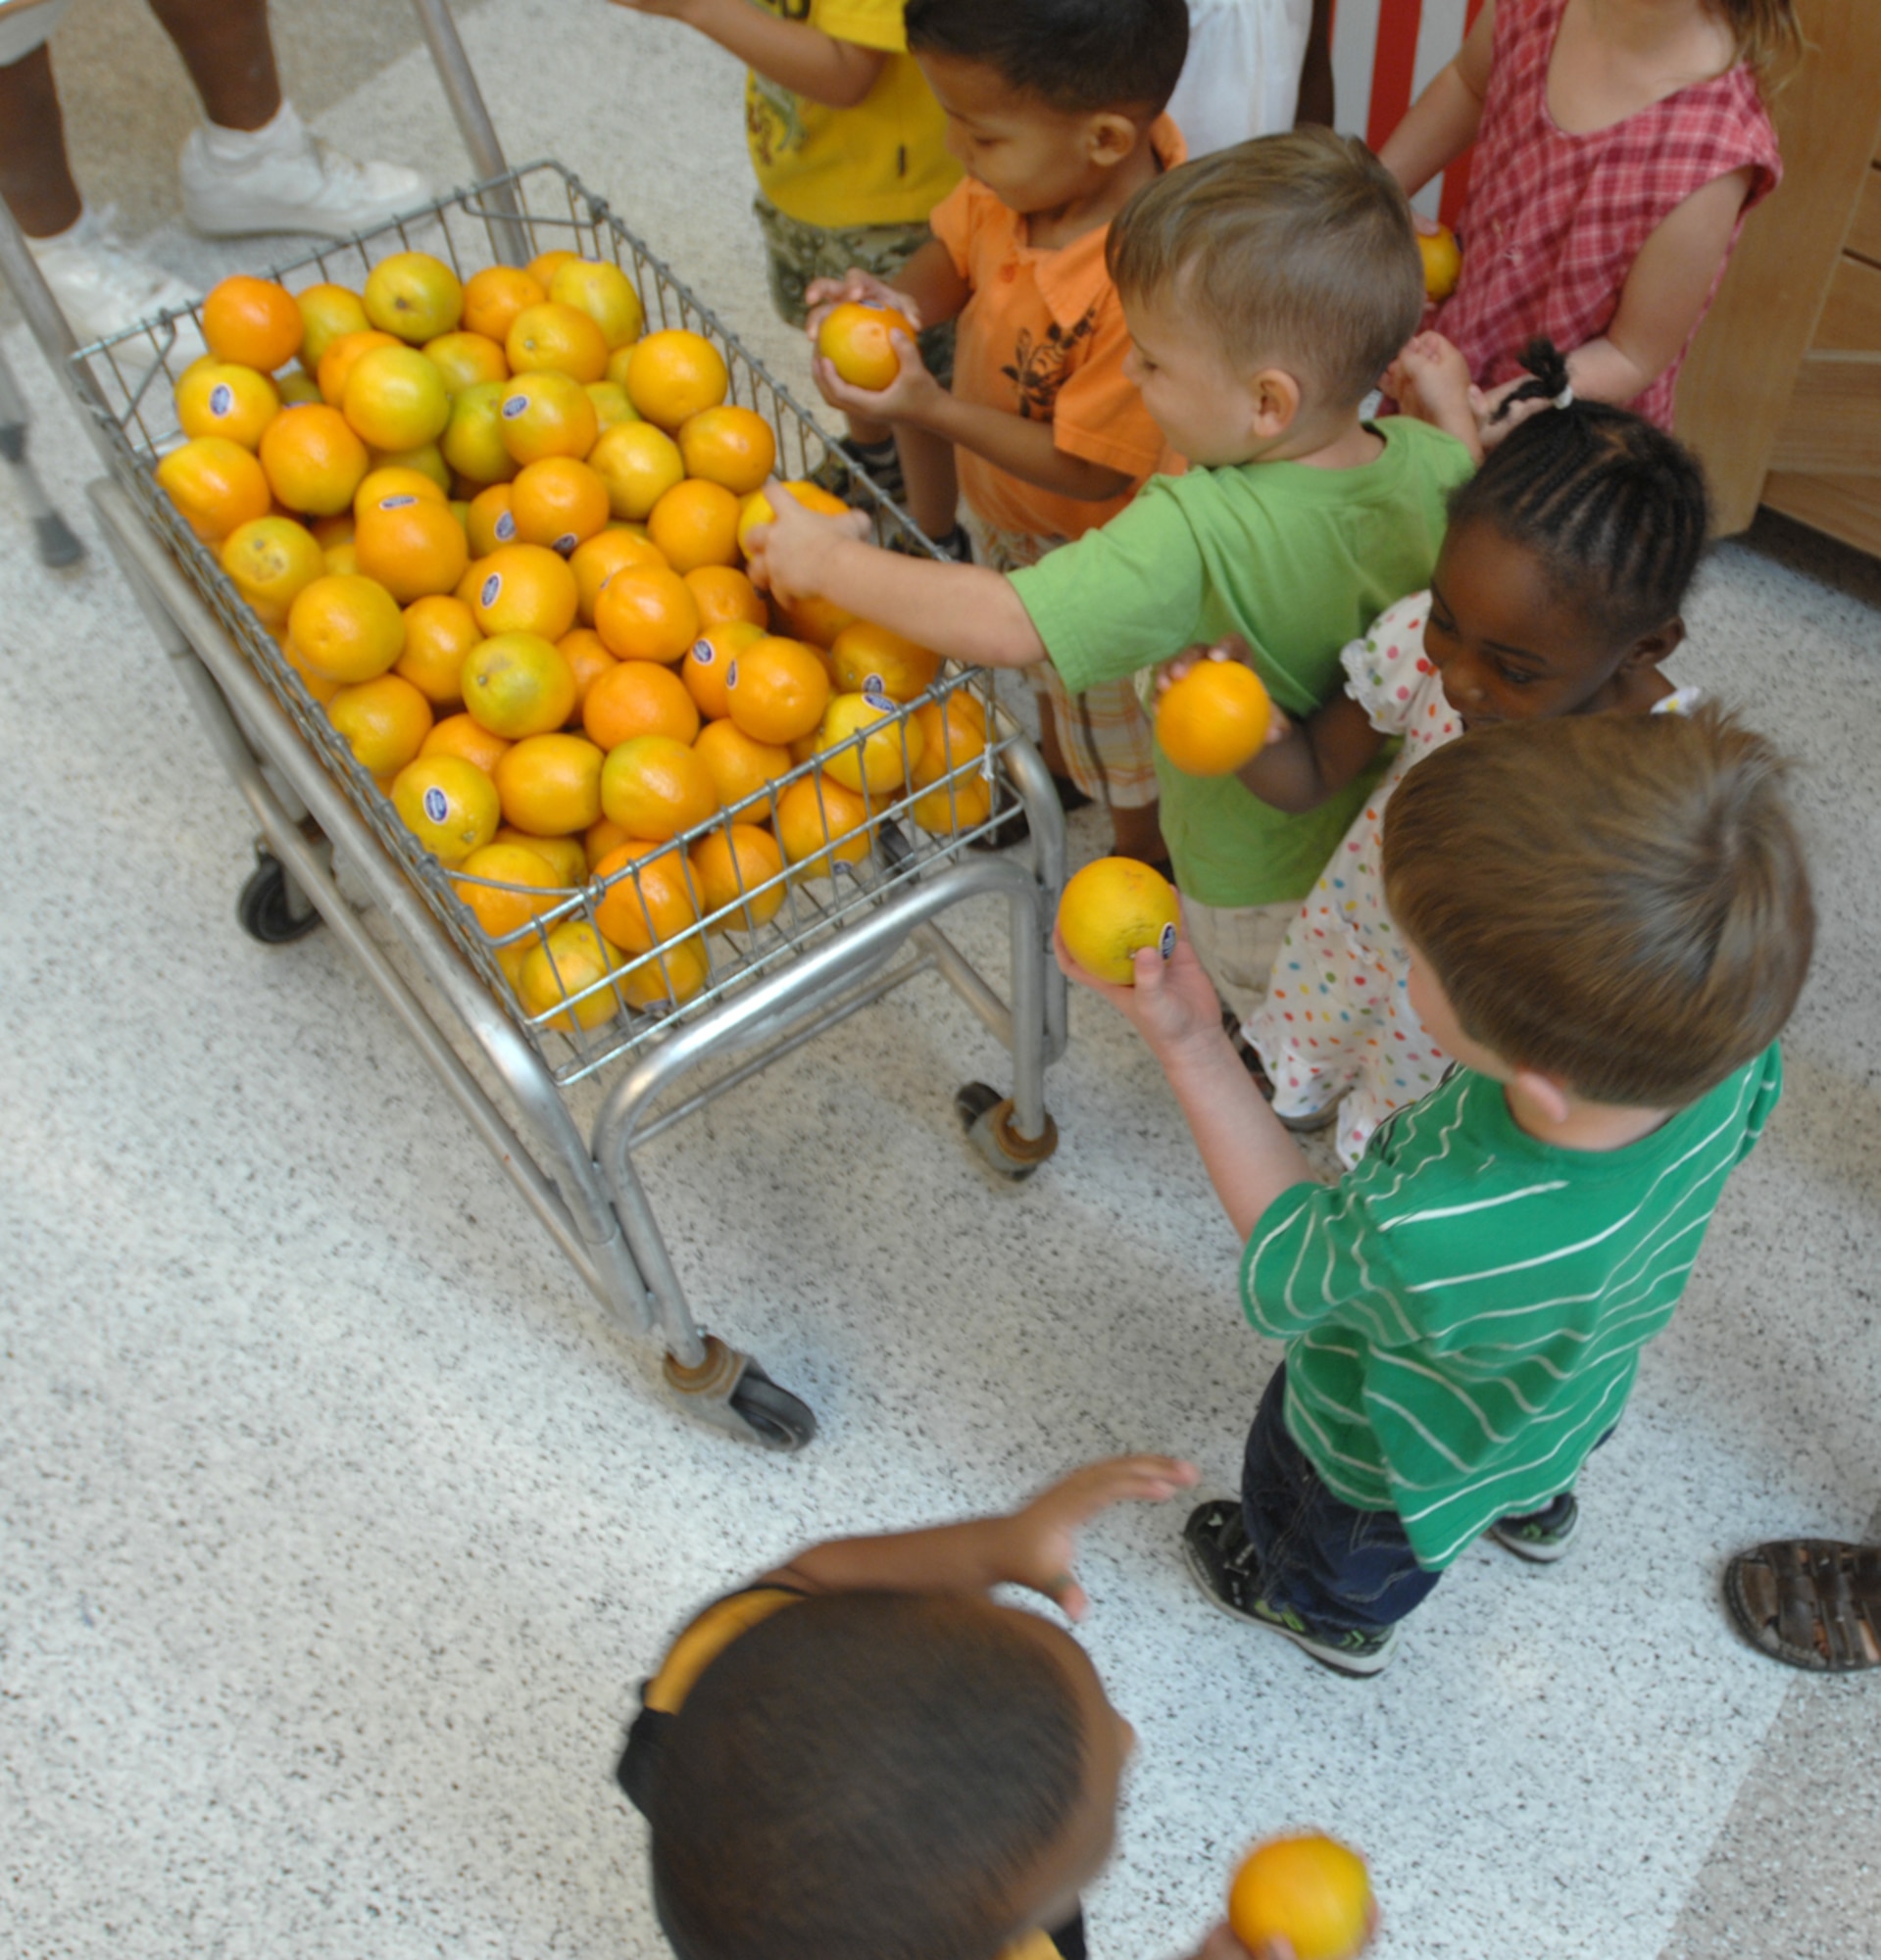 WHITEMAN AIR FORCE BASE, Mo. - The Whiteman Commissary played host to the Child Development Center’s preschool class four and Spongebob Squarepants, Aug. 5. While at the Commissary the children and Sharon Greene, produce manager, played ‘name that fruit.’ Alyne Frampton, a commissary employee, also assisted Ms. Greene and the children through the coolers and stock room. Spongebob was on hand for photos with Karen Howard and Janelle Bratton, CDC teachers and the children. C & C Produce of Kansas City, Mo donated oranges to the children as parting gifts. (U.S. Air Force photo/Senior Airman Kenny Holston)